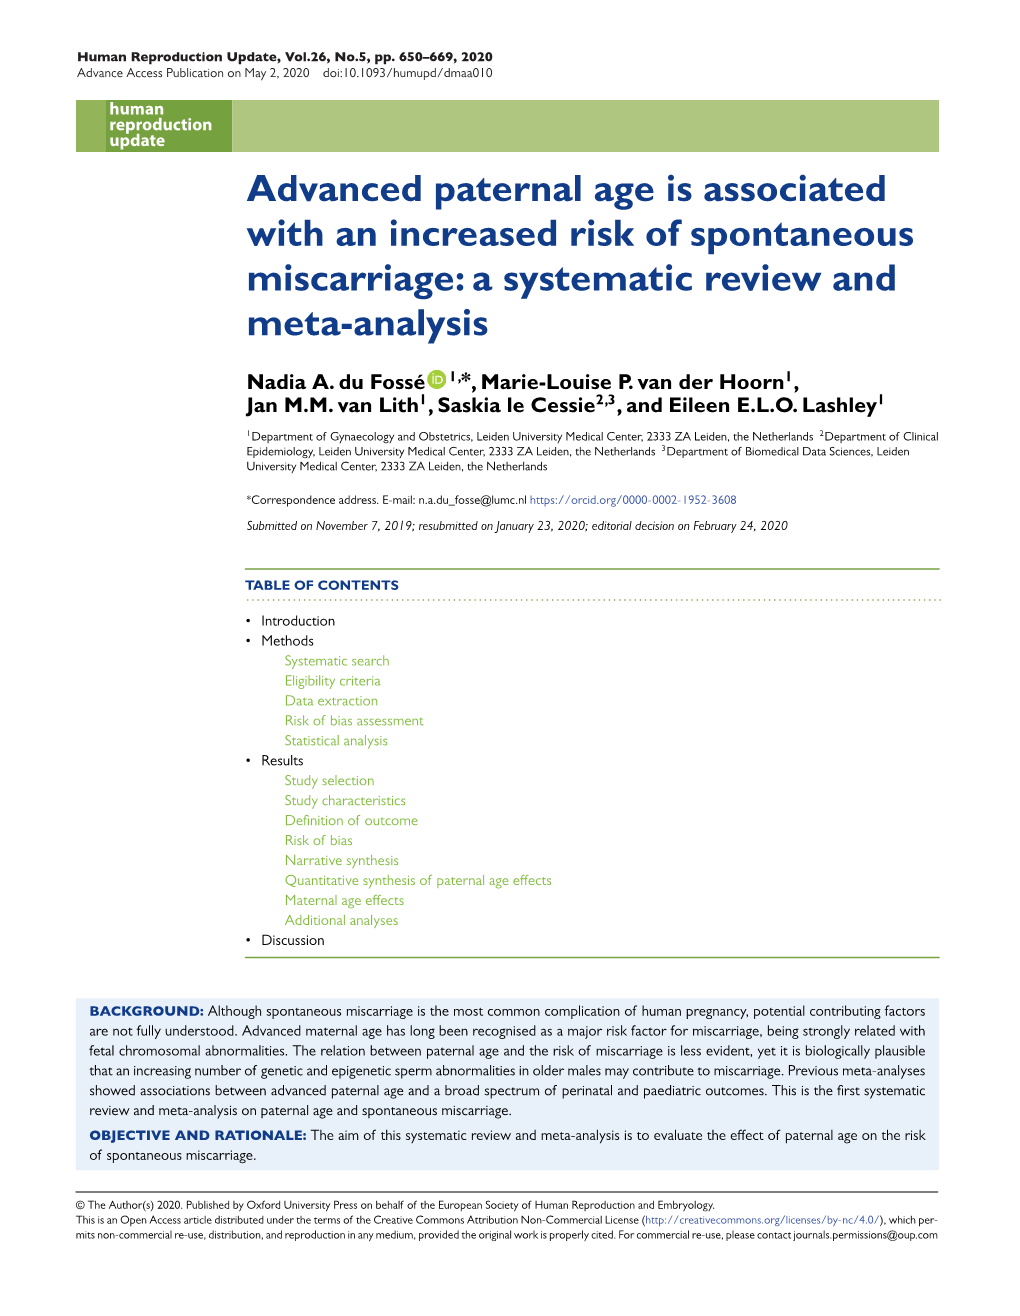 Advanced Paternal Age Is Associated with an Increased Risk of Spontaneous Miscarriage: a Systematic Review and Meta-Analysis